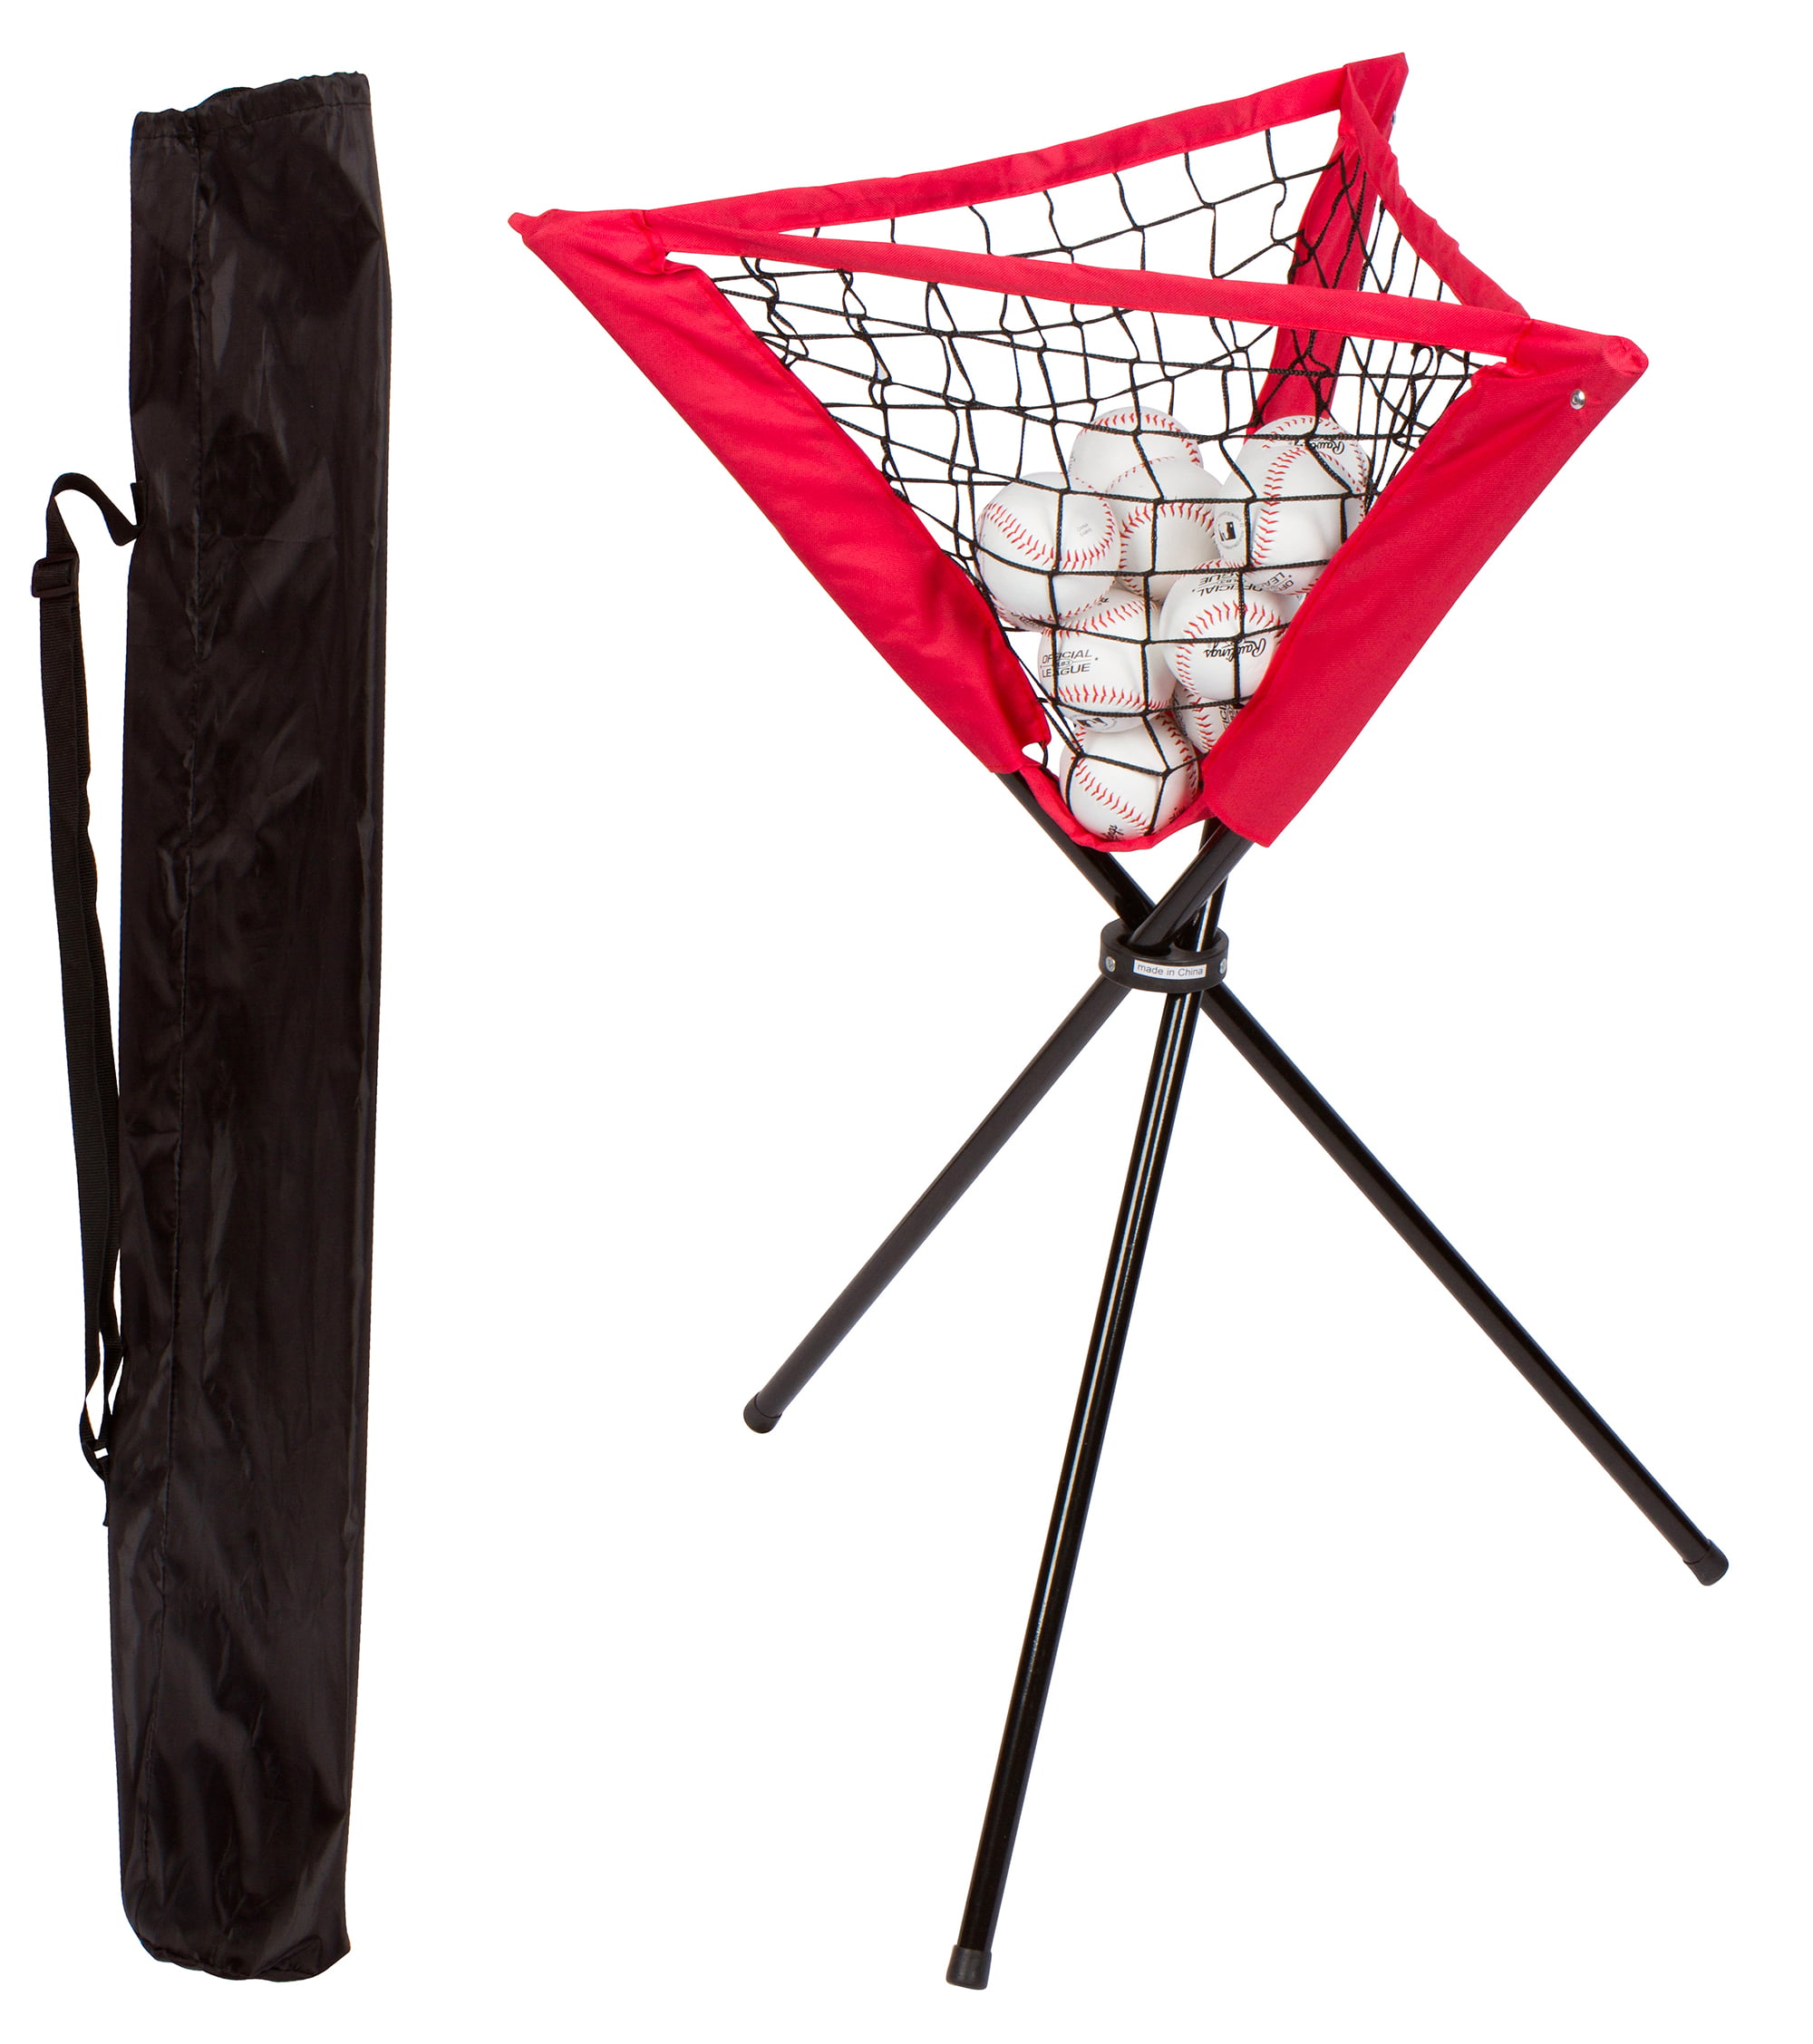 Portable Baseball Ball Caddy w/Carry Bag Perfect for Practice Hitting 